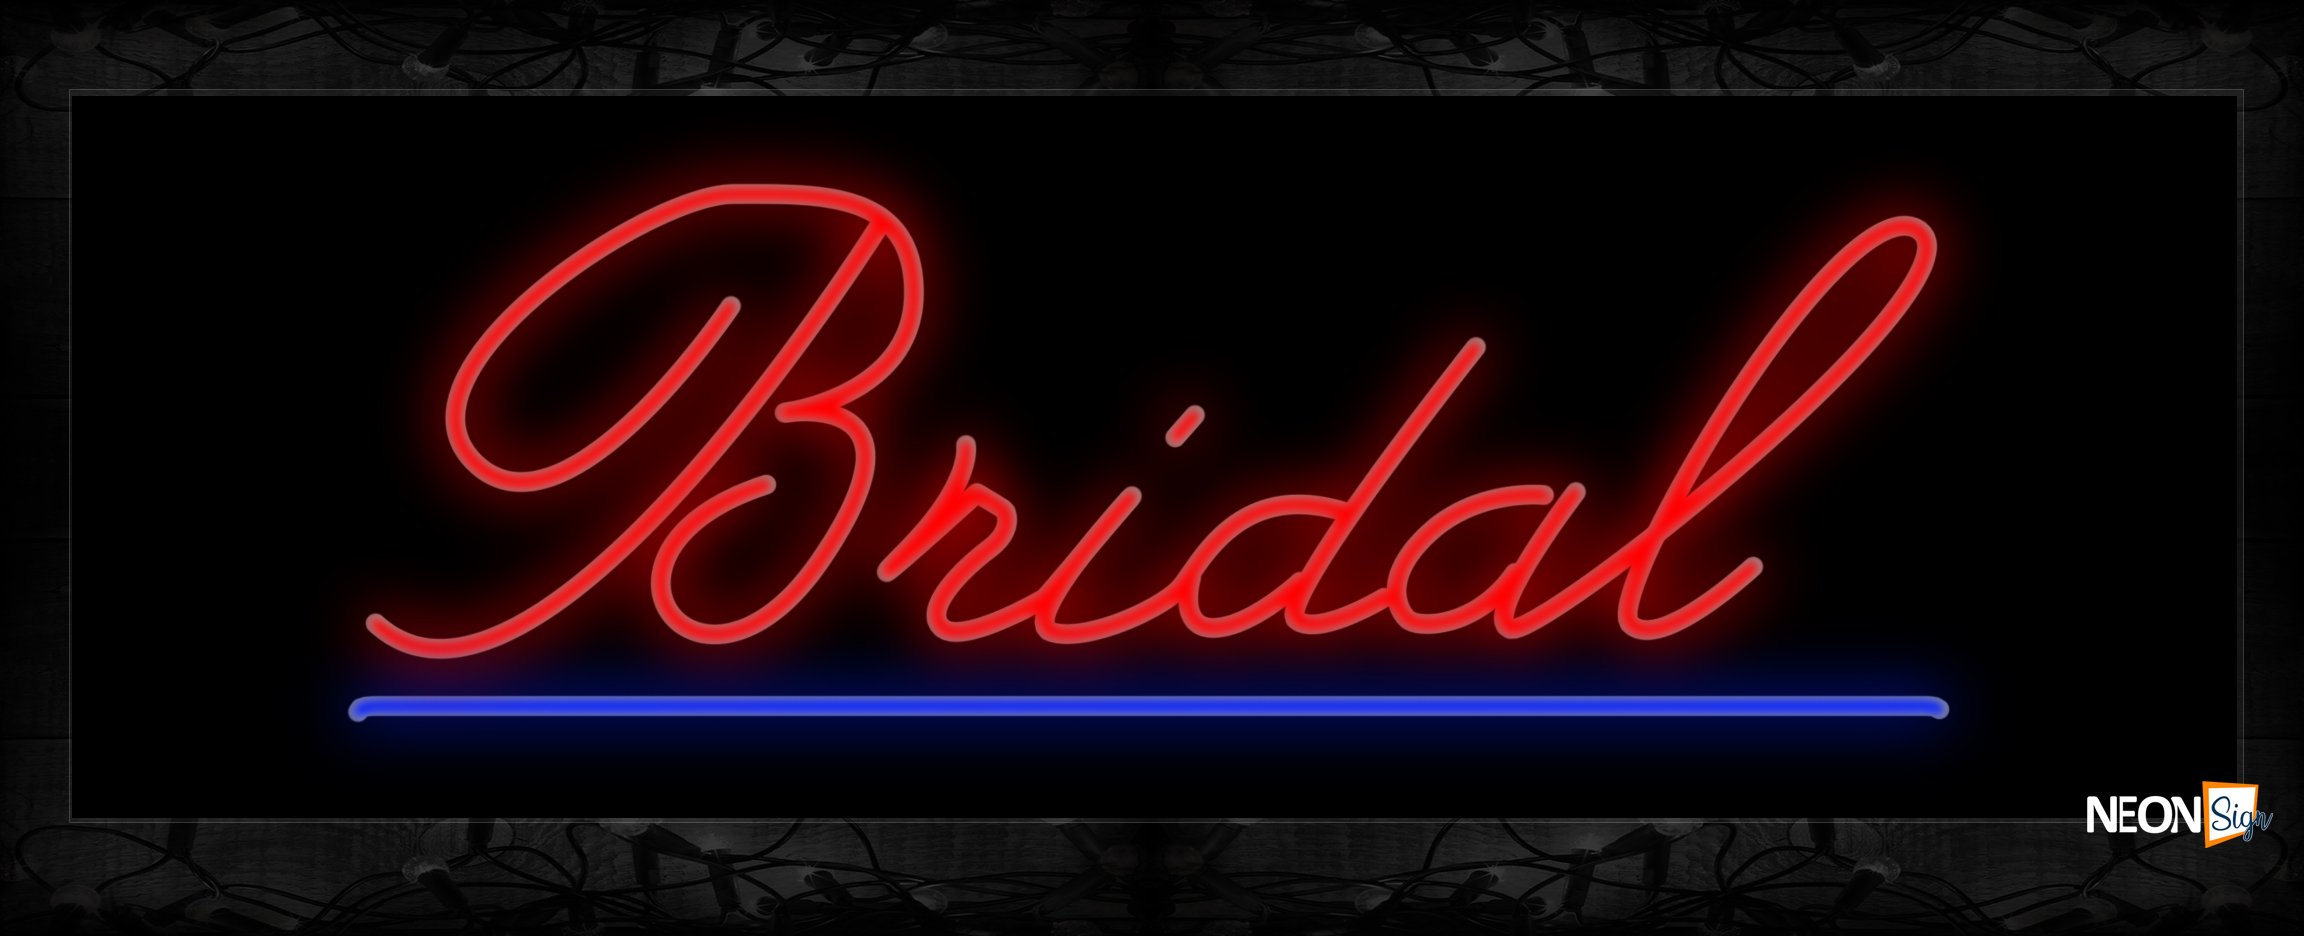 Image of 10025 Neon Sign 13x32 Black Backing